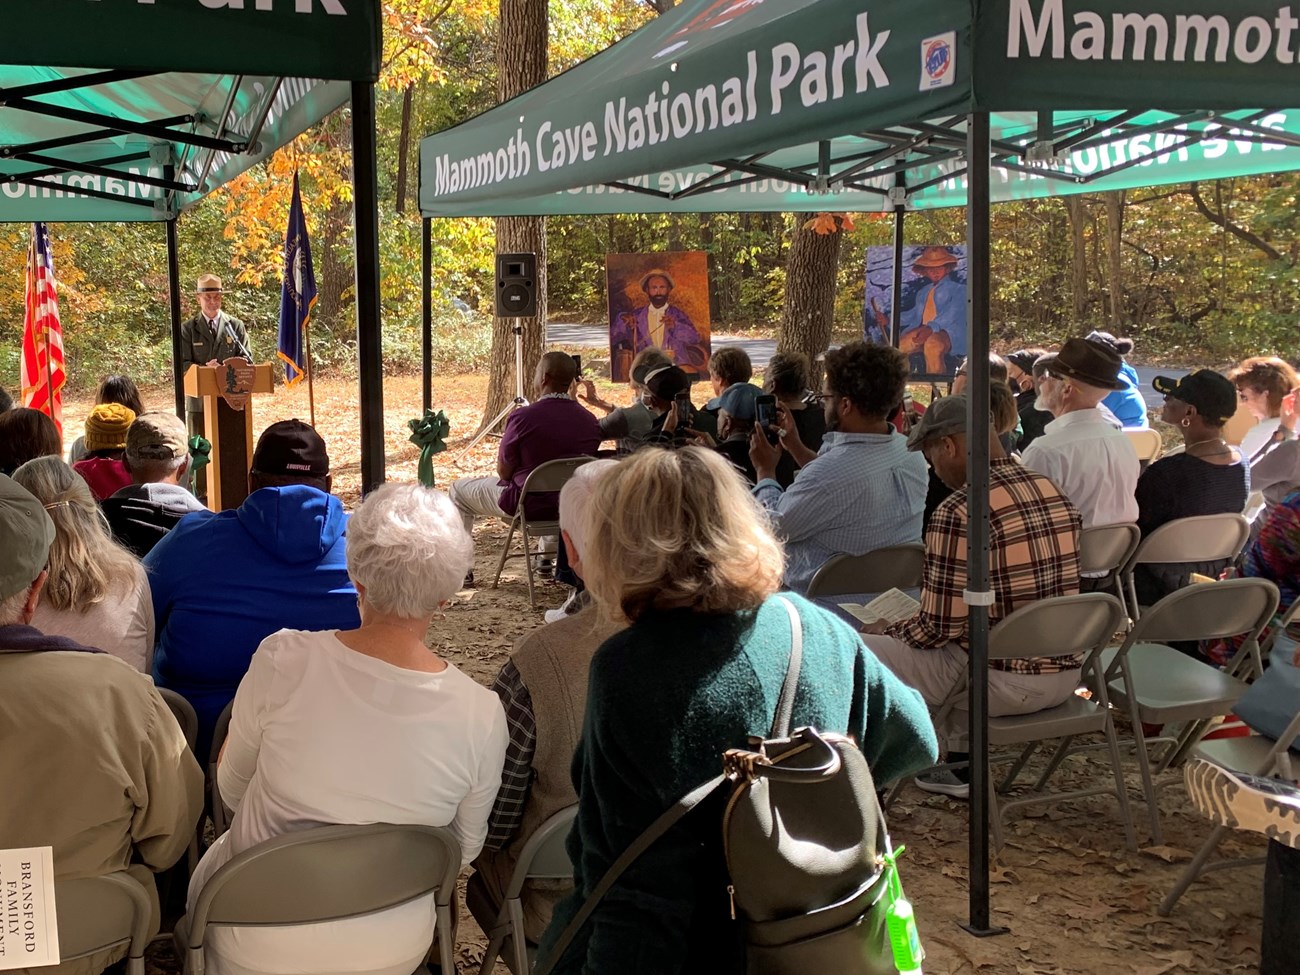 A large group of people sit under green canopies that say "Mammoth Cave National Park" while listening to a man speak at a podium.